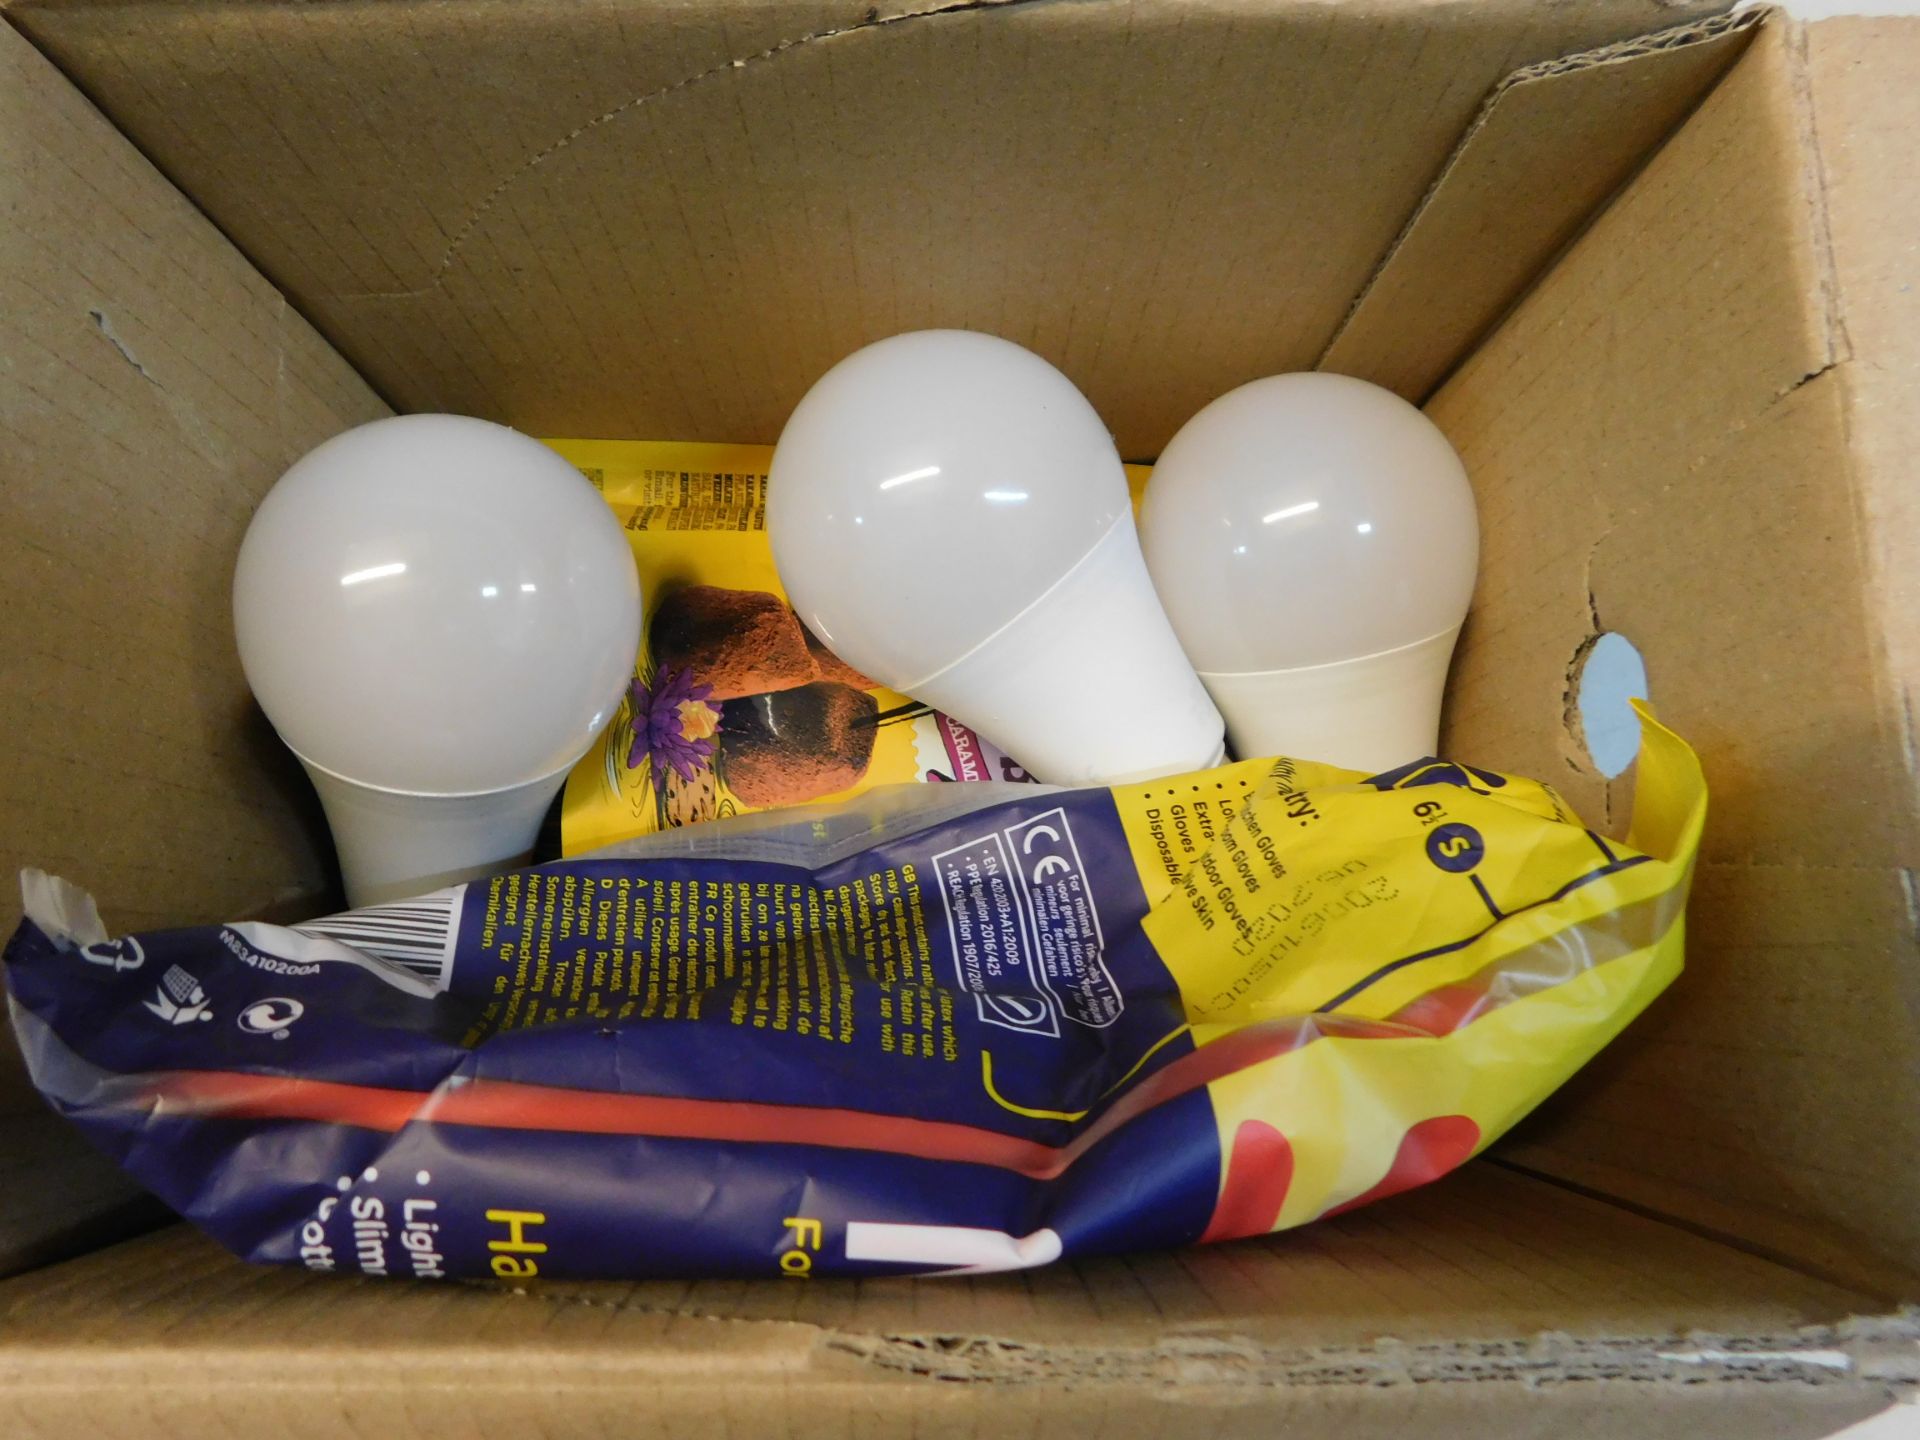 1 ASSORTED BOX OF KITCHEN GLOVES LIGHT BULBS AND TRUFFLE BITES RRP Â£29.99